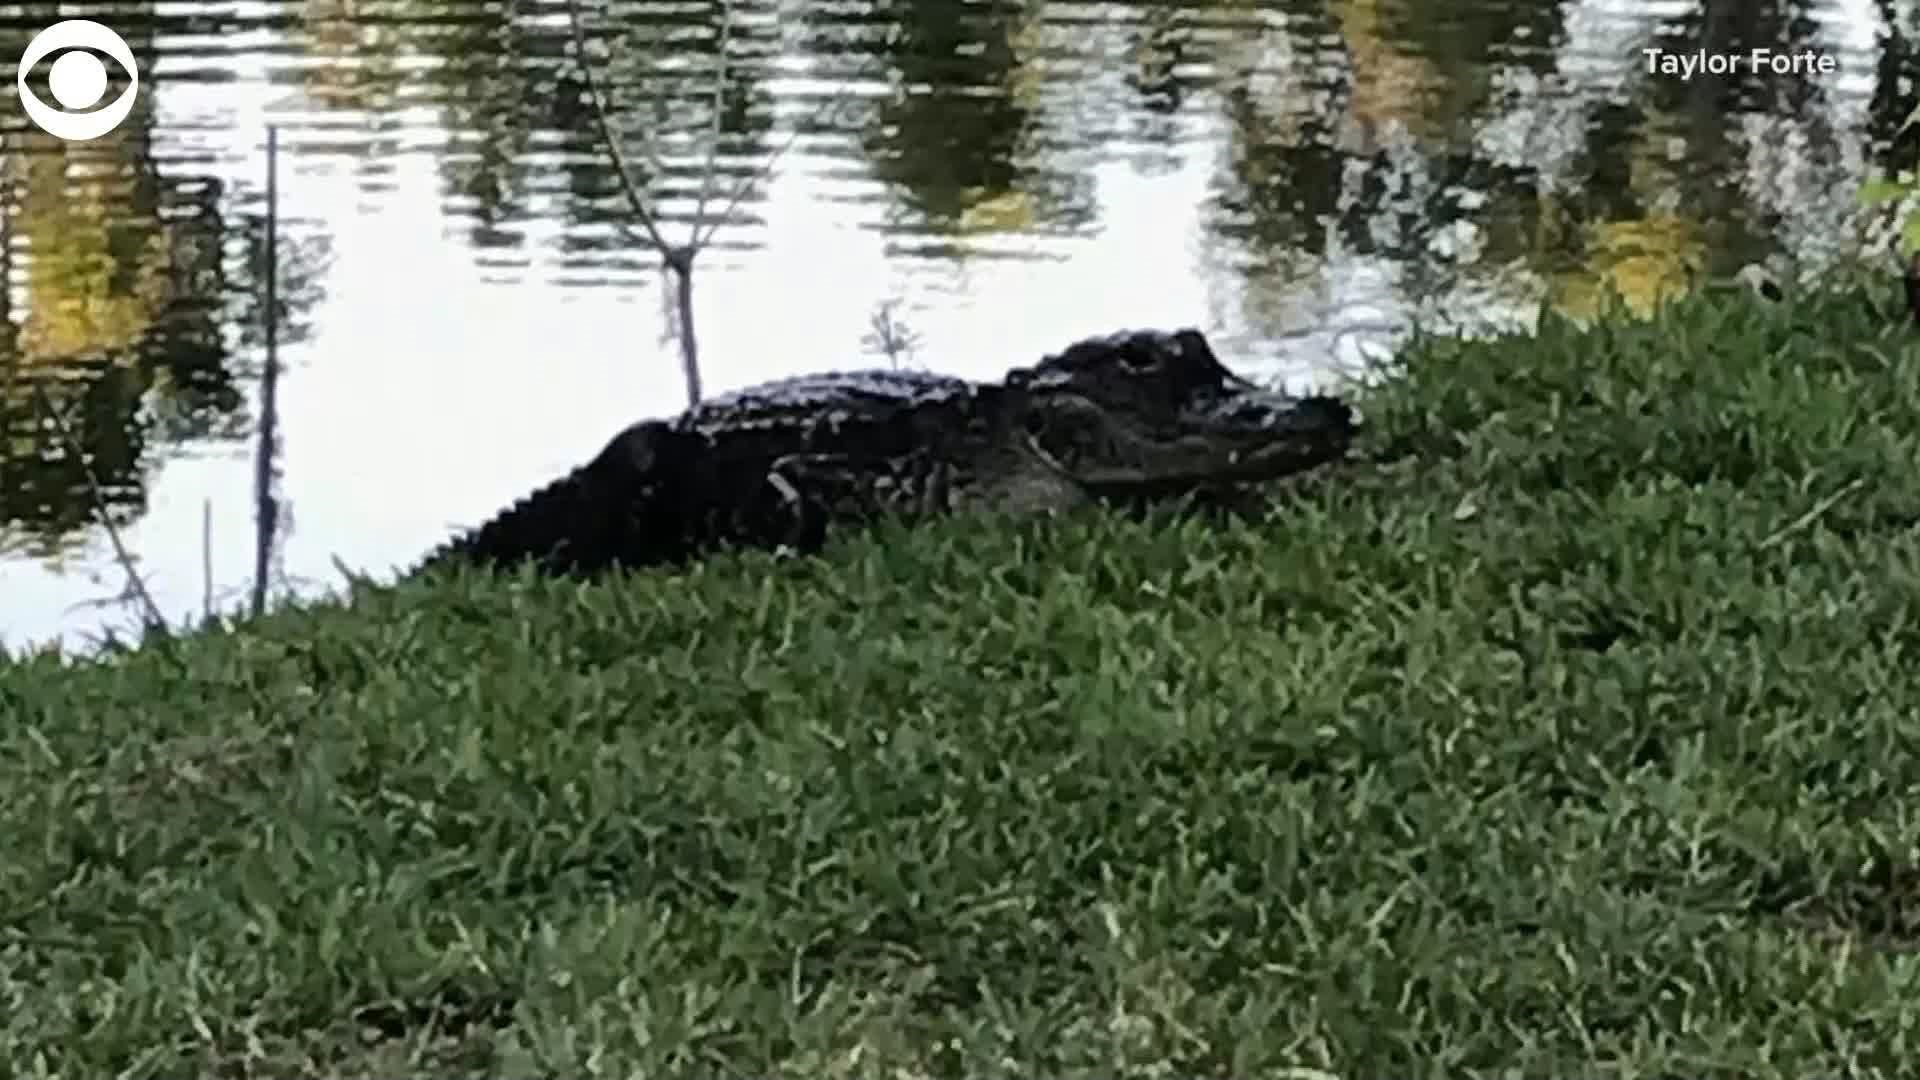 Trevor Walters and Taylor Forte had a special picnic date last week in Gainesville, FL. Little did they know an uninvited hungry guest would make an appearance.